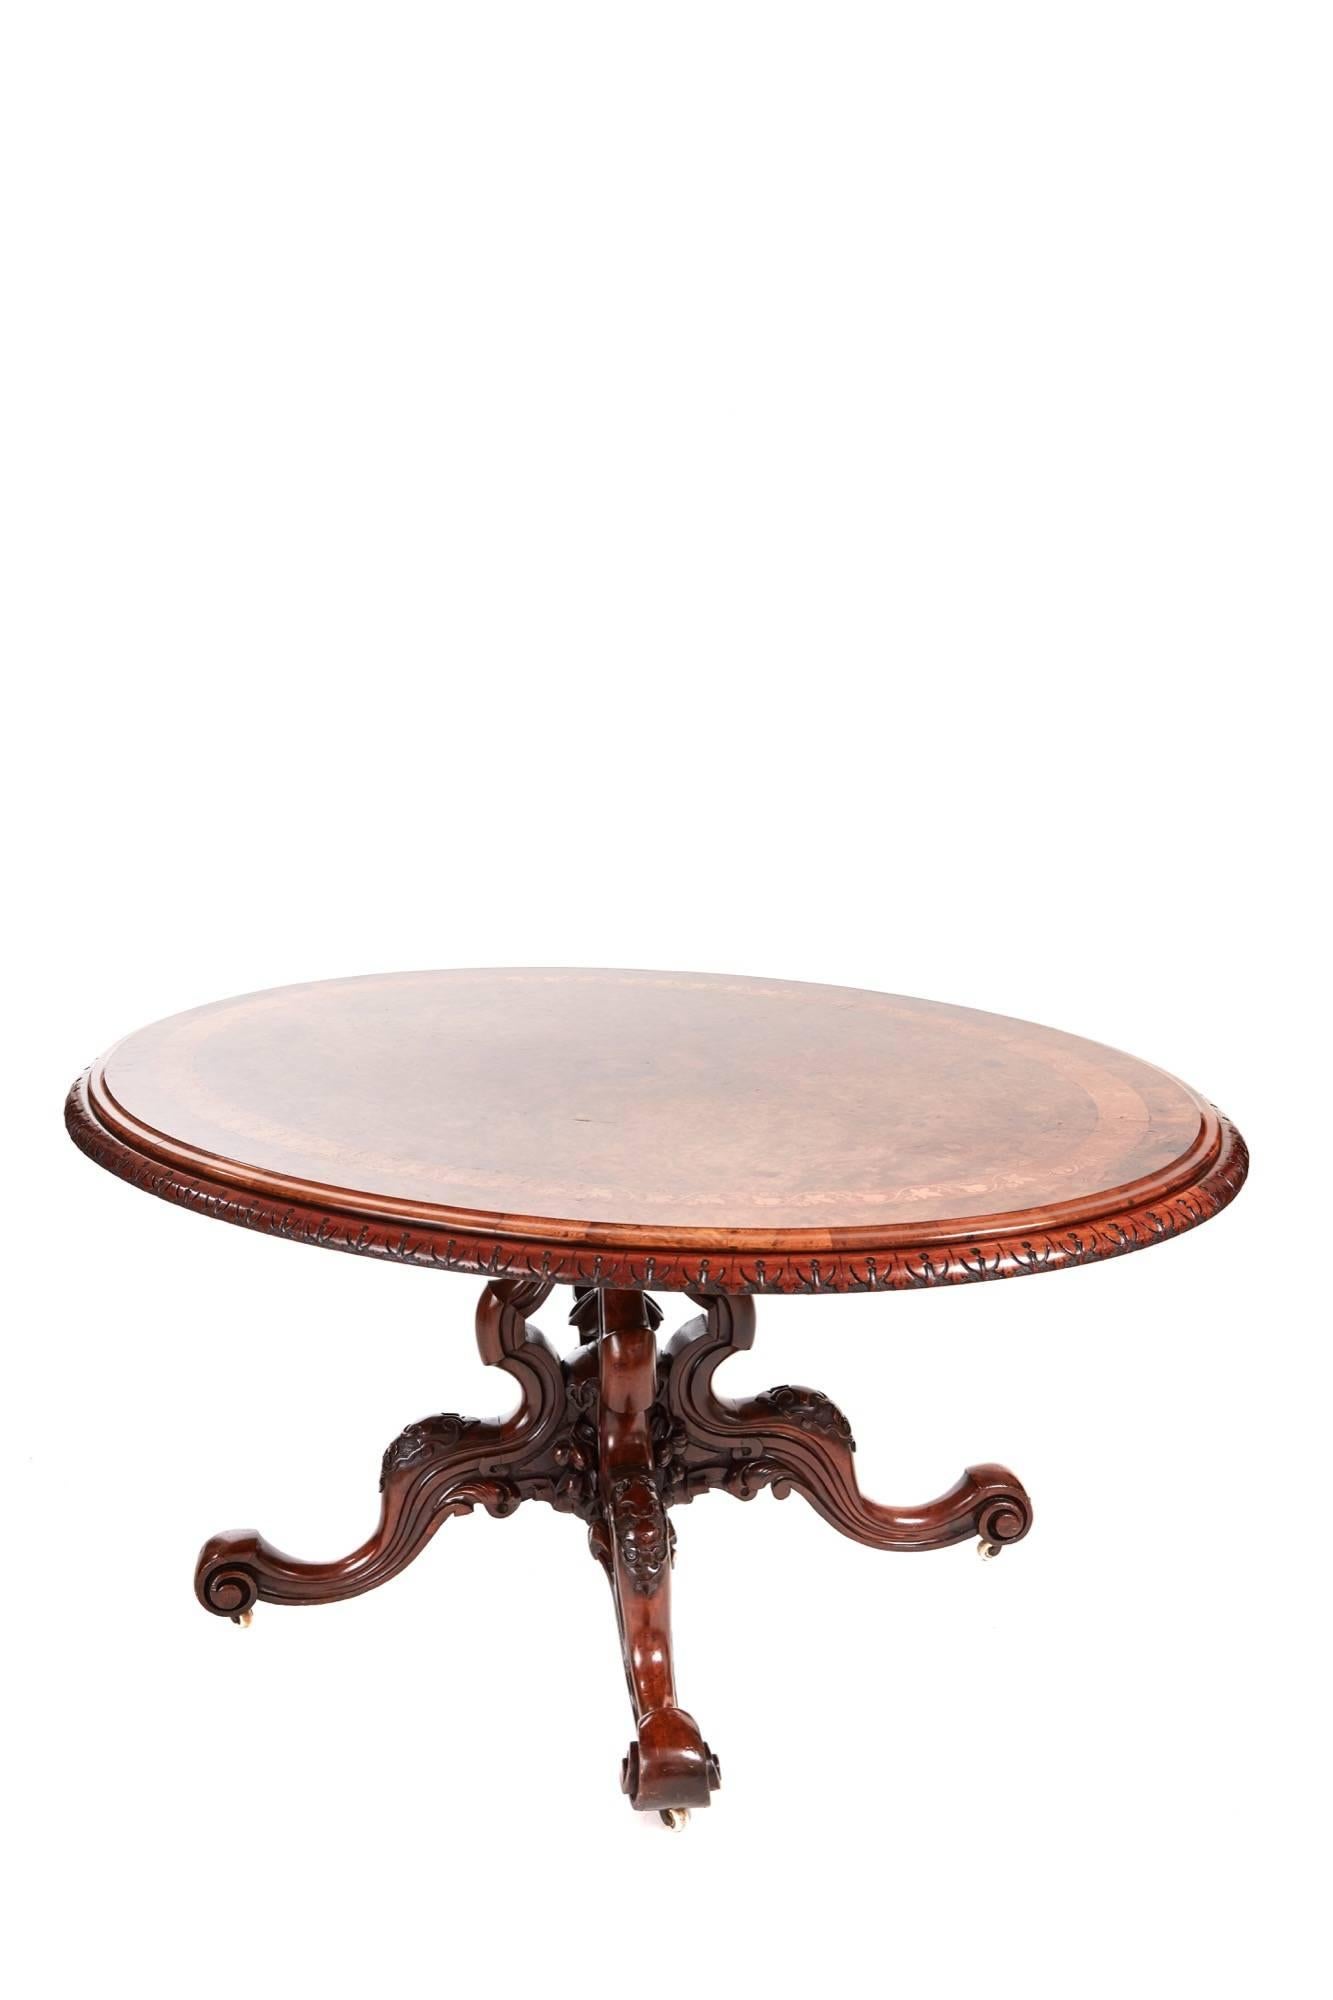 A fine quality Victorian inlaid burr walnut centre table, the oval top inlaid with kingwood and satinwood marquetry banding thumb moulded edge and a further carved edge, standing on a fantastic carved shaped basket base lovely carved final to the